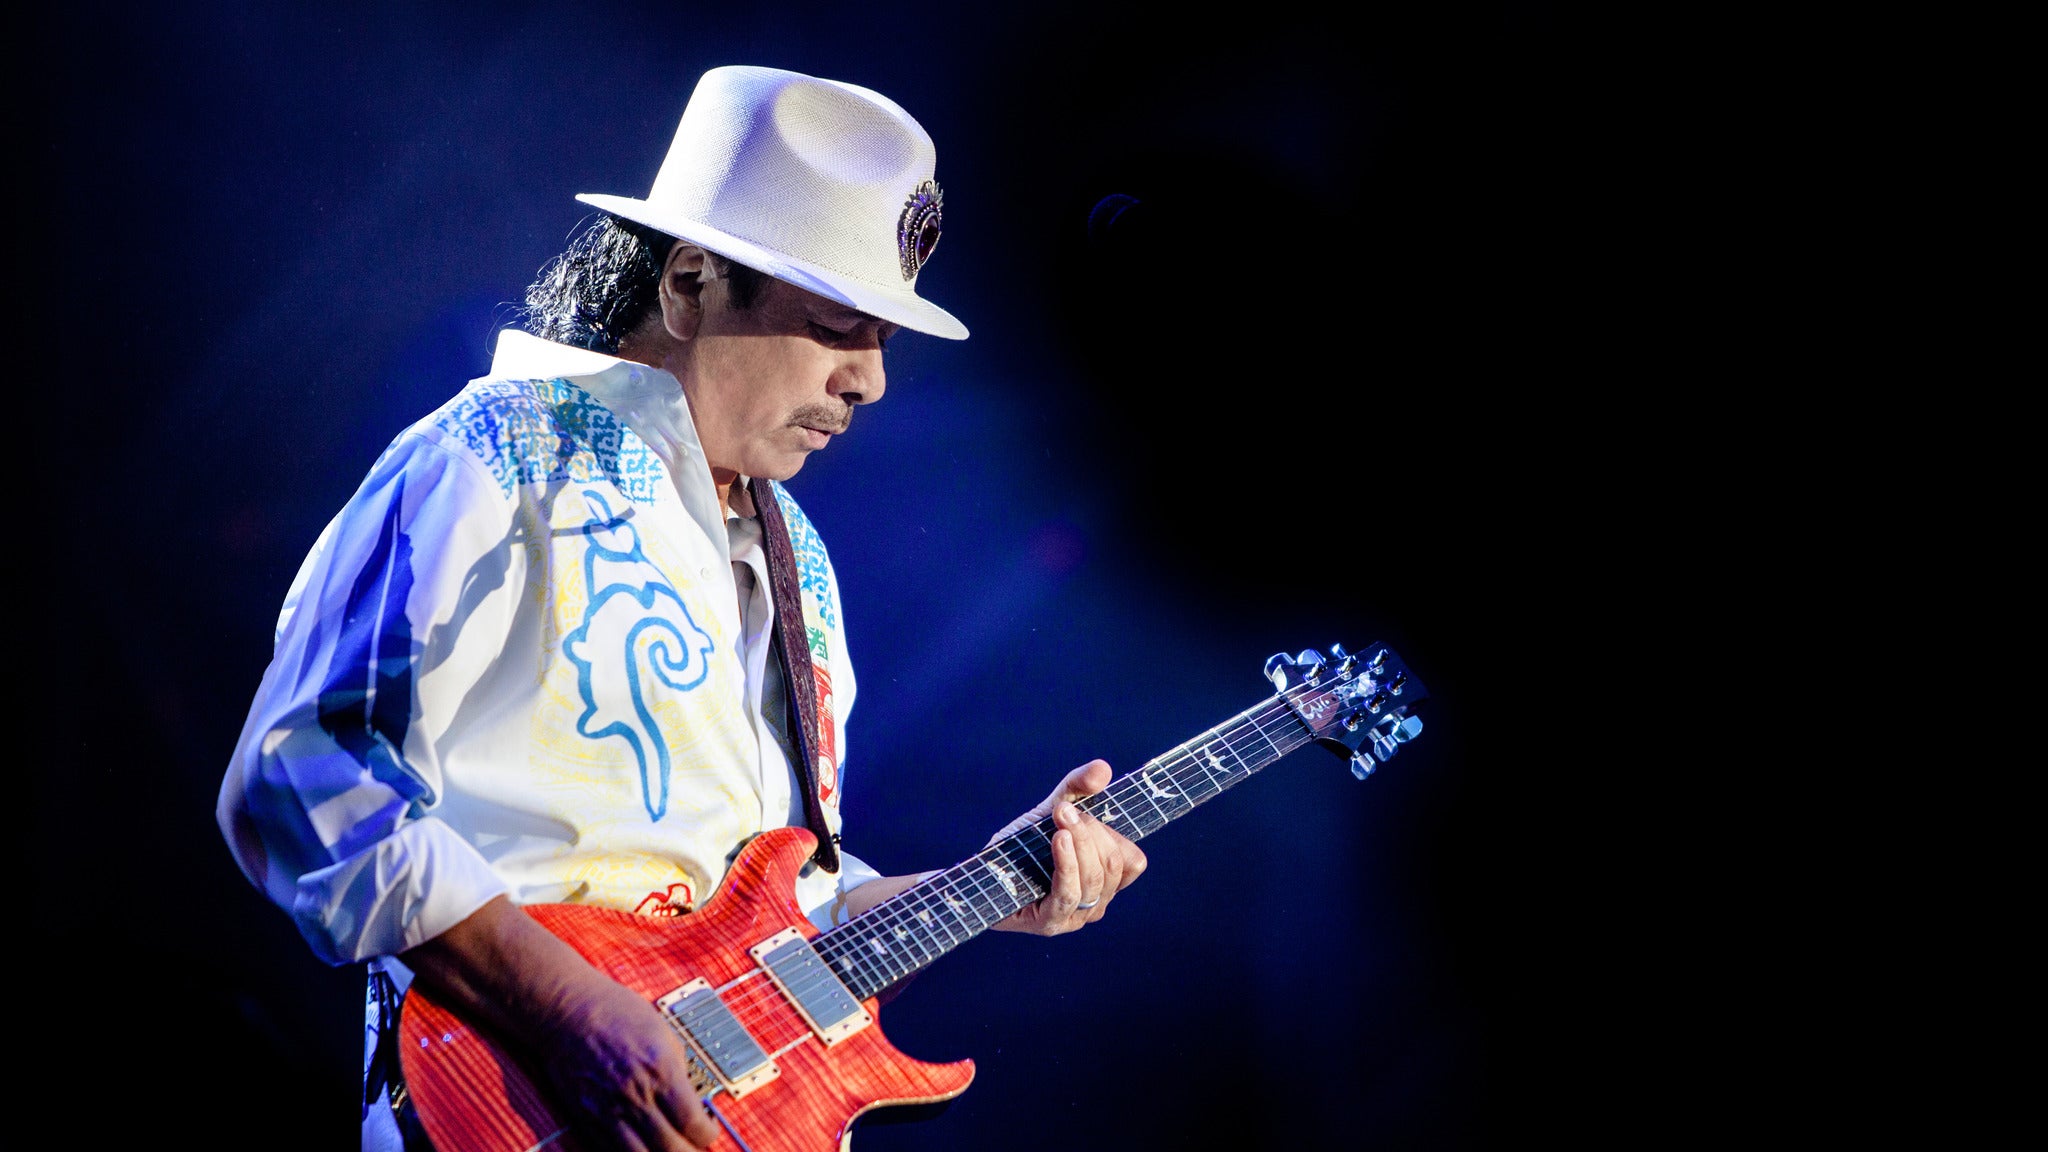 Santana - 1001 Rainbows Tour presale code for advance tickets in Huber Heights